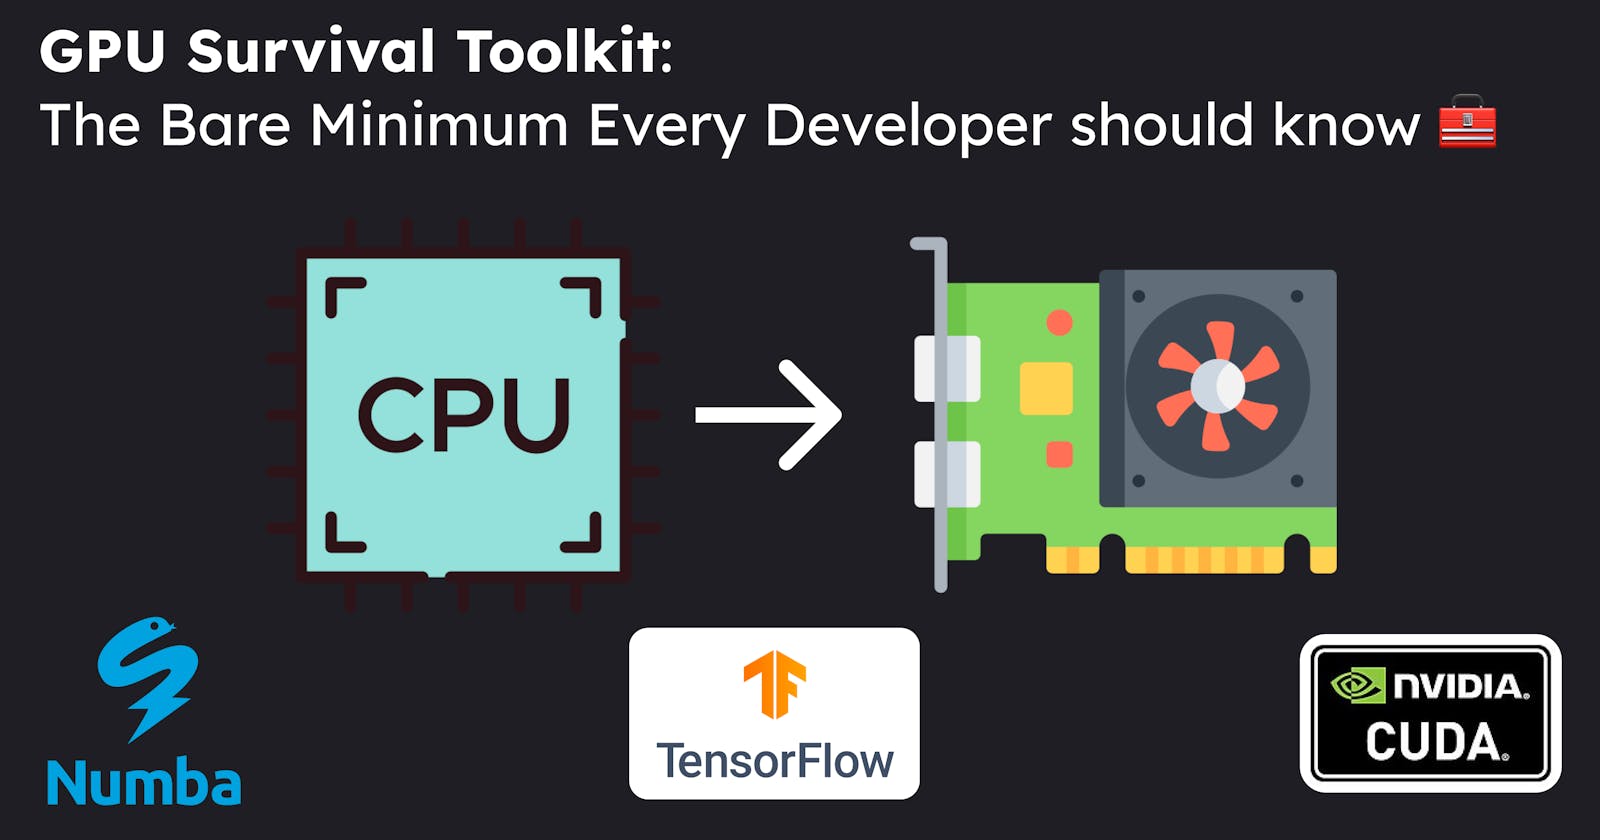 GPU Survival Toolkit for the AI age: The bare minimum every developer must 
know